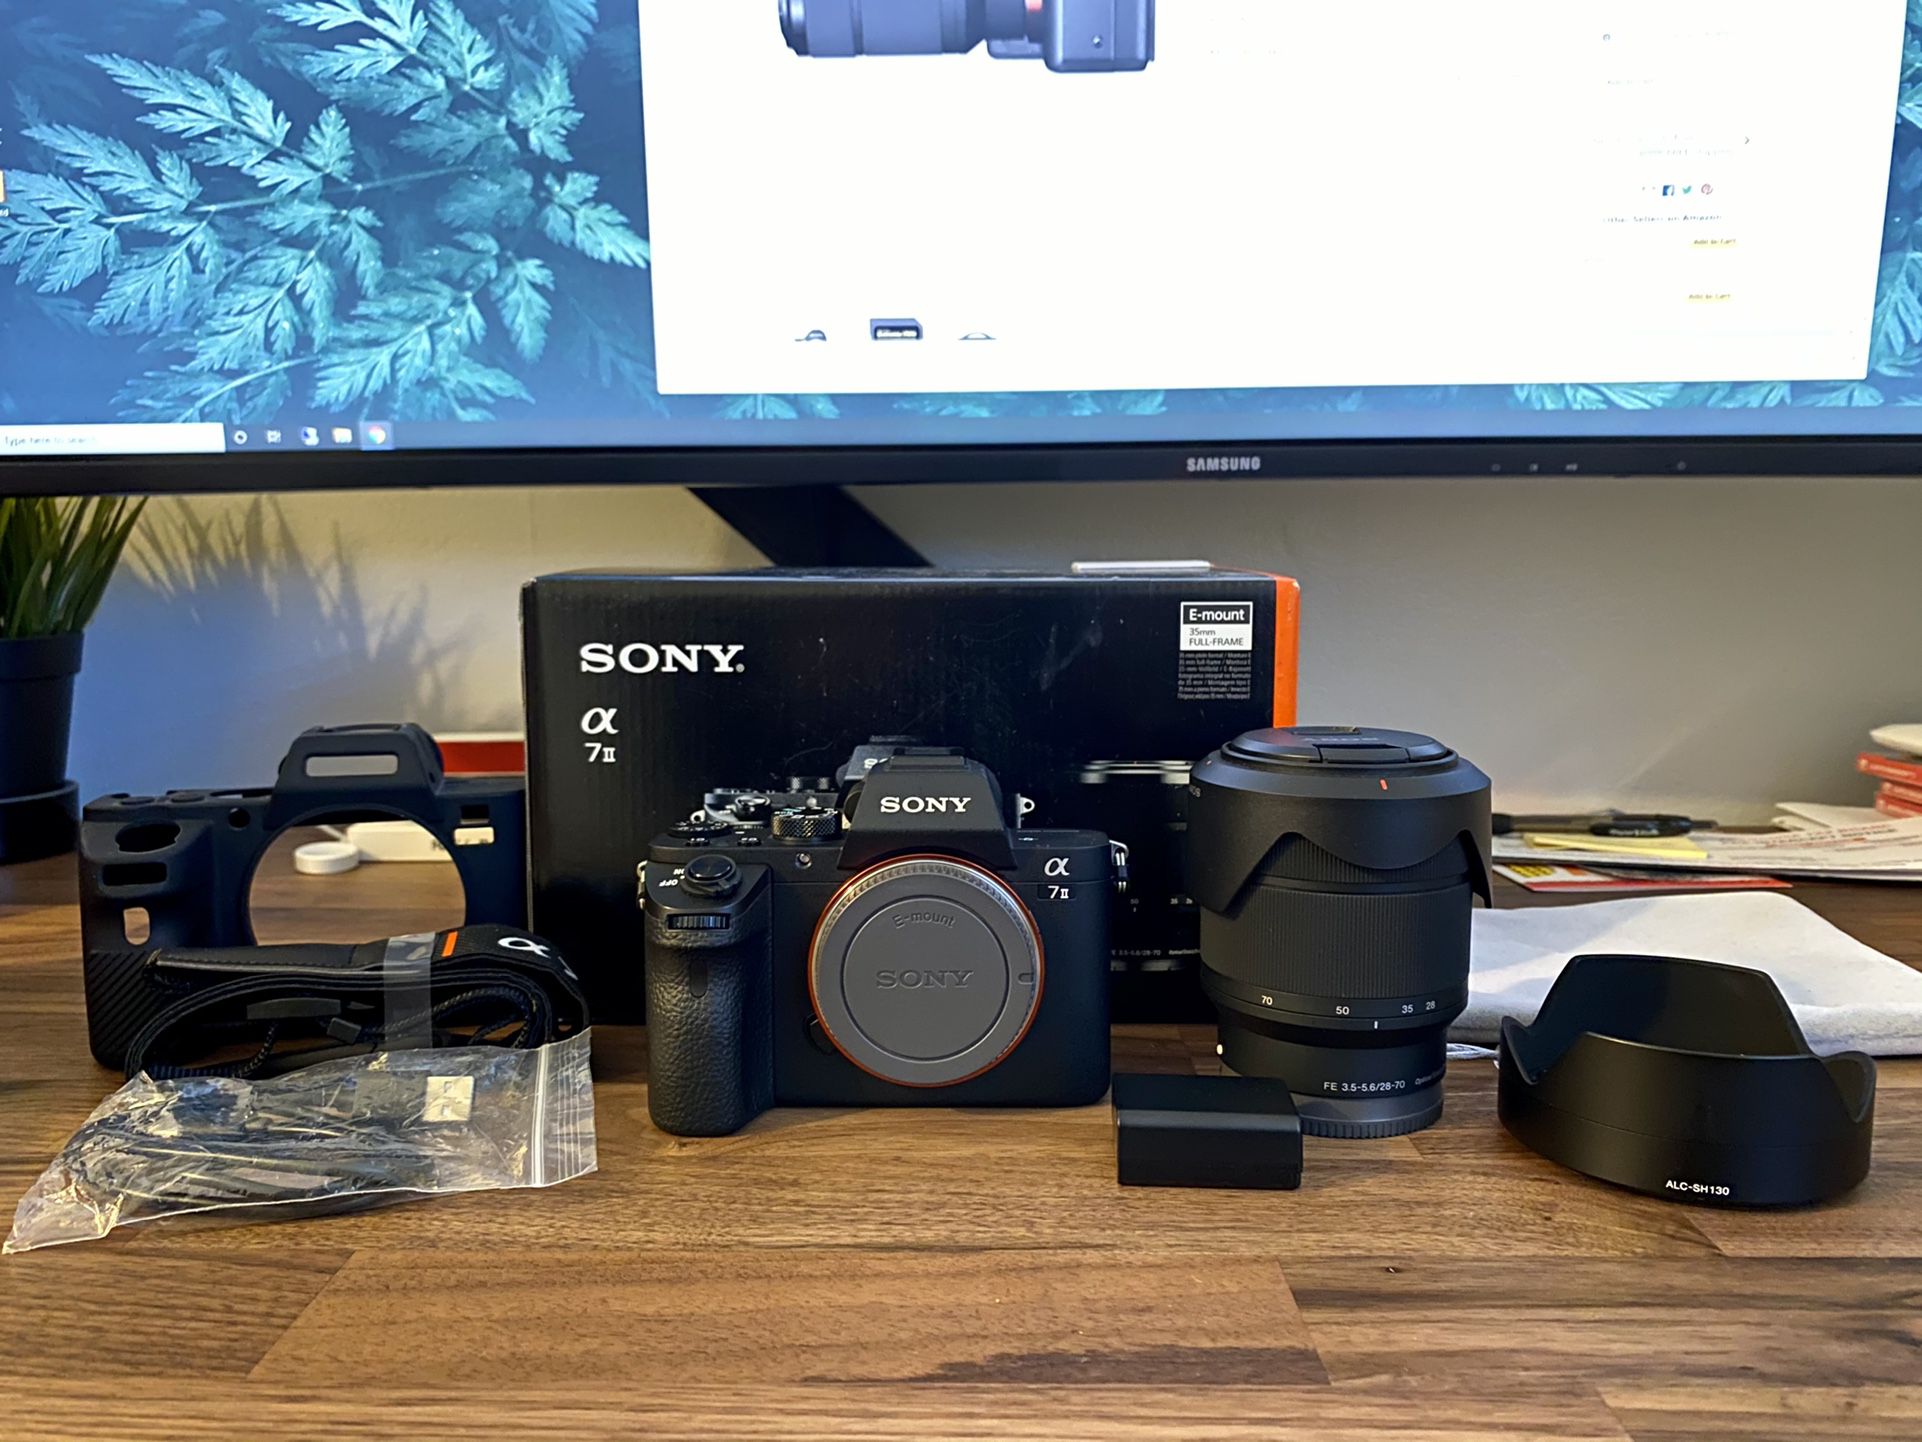 Sony A7ii Camera + 2 lenses and extras